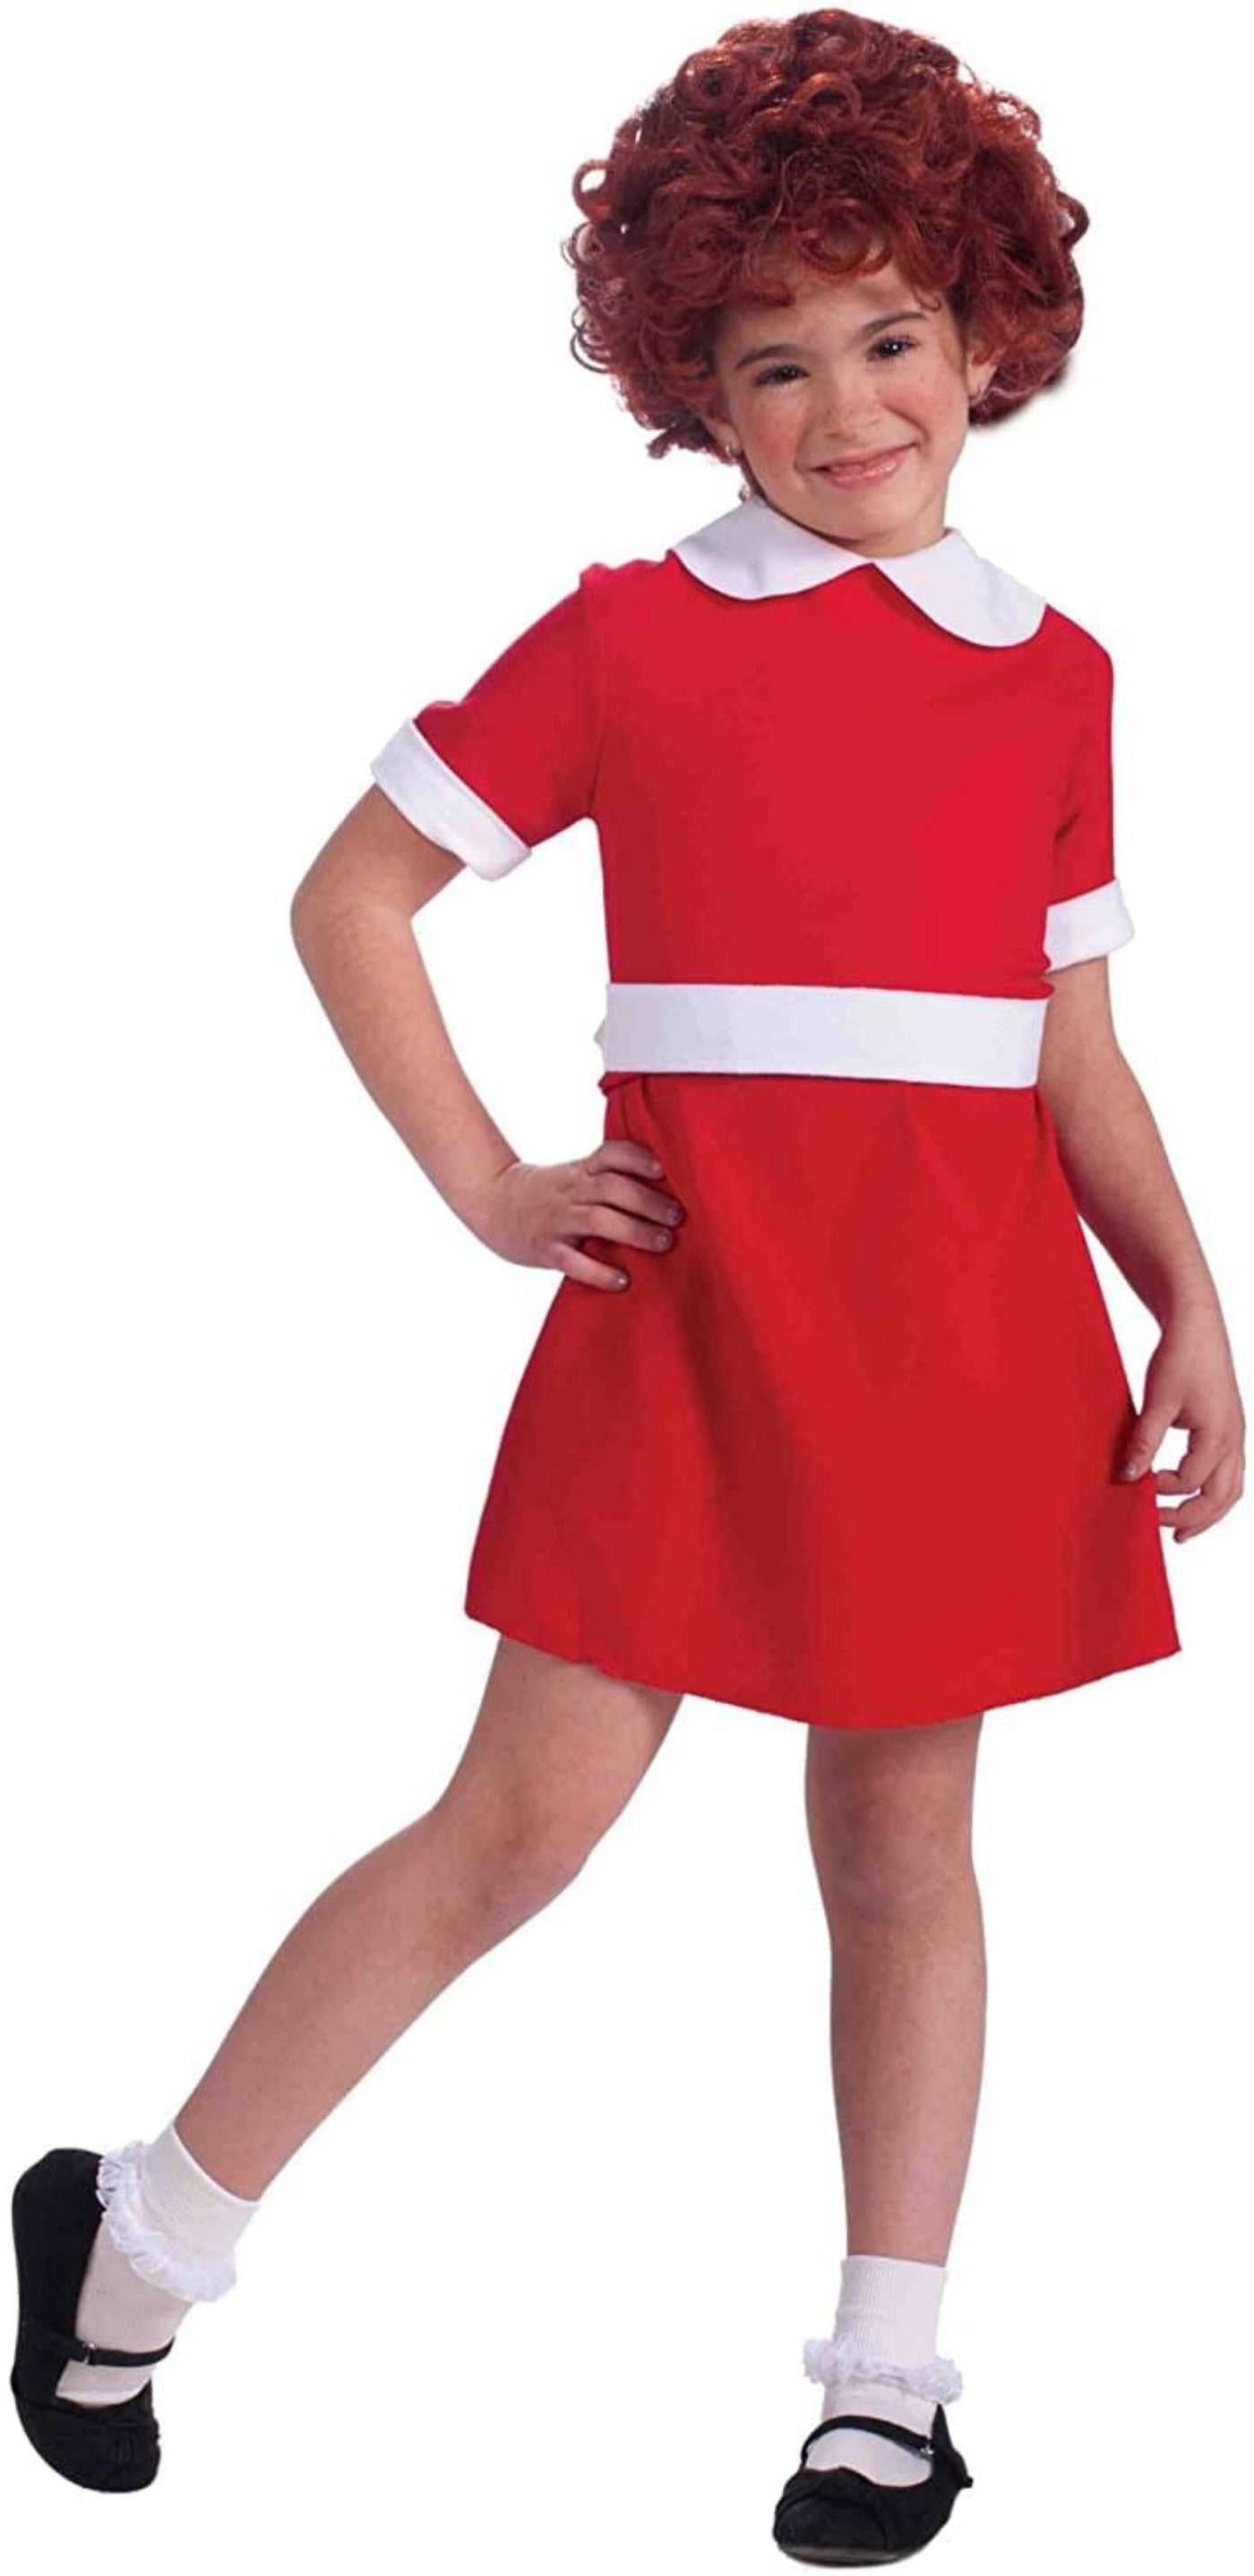 The Musical Annie Girls Costume